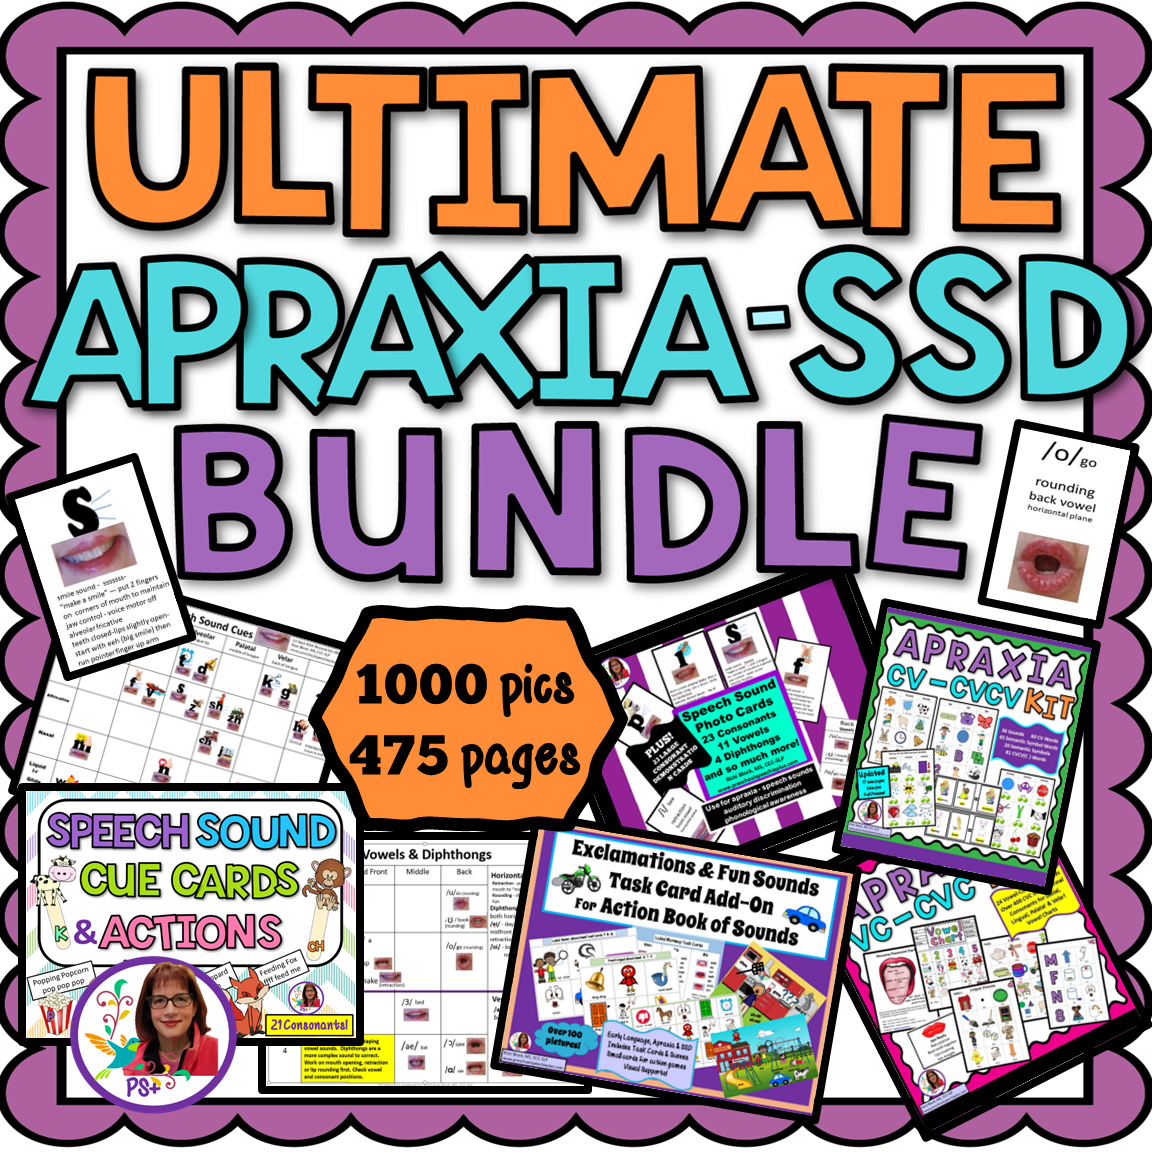 Ultimate apraxia kit cover.png